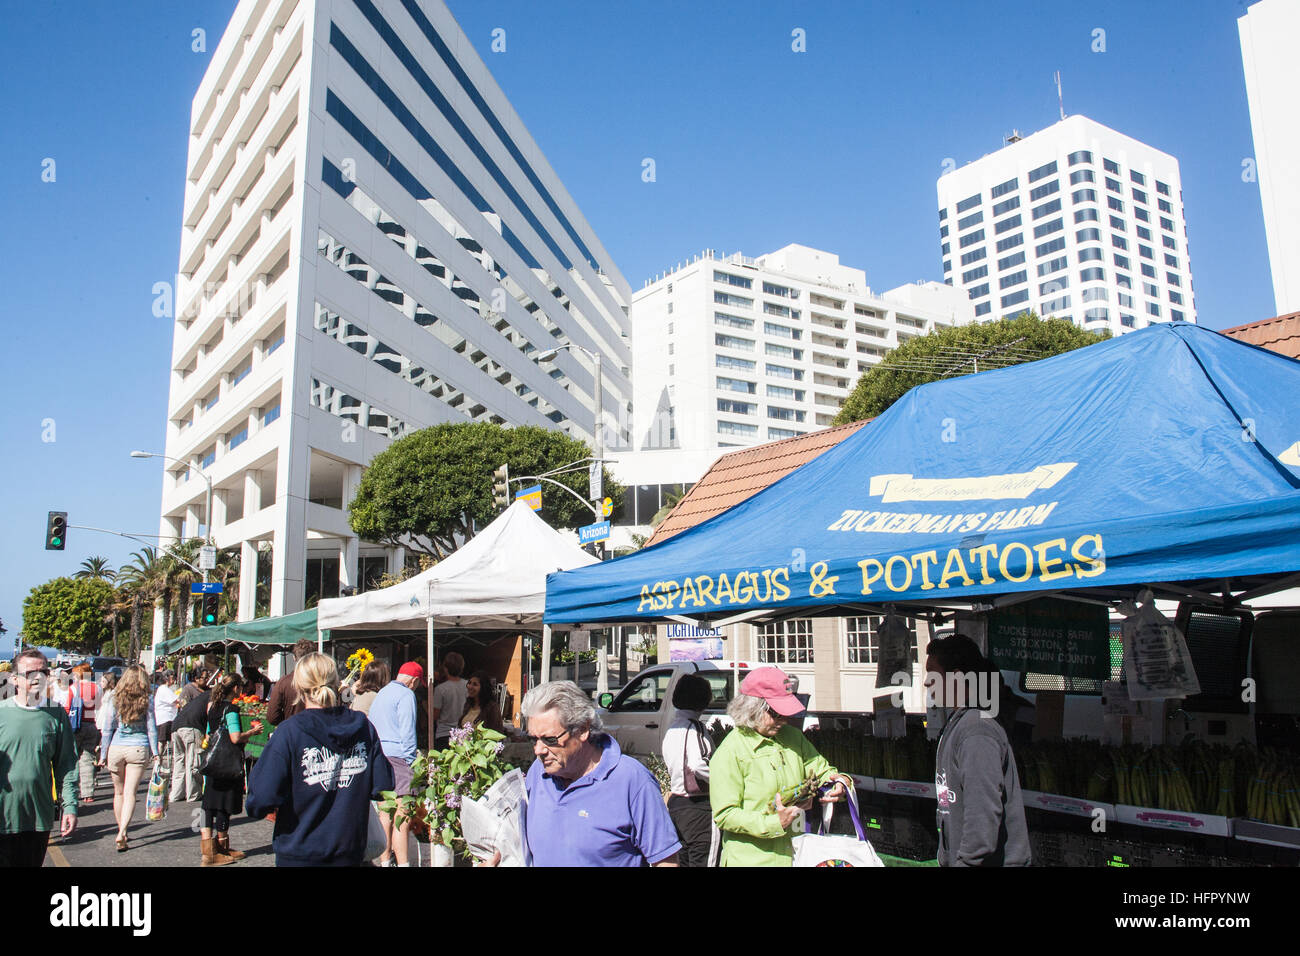 Organic Farmers Market at Santa Monica,National Highway 1,Pacific Coast Highway,PCH, California,U.S.A.,United States of America, Stock Photo